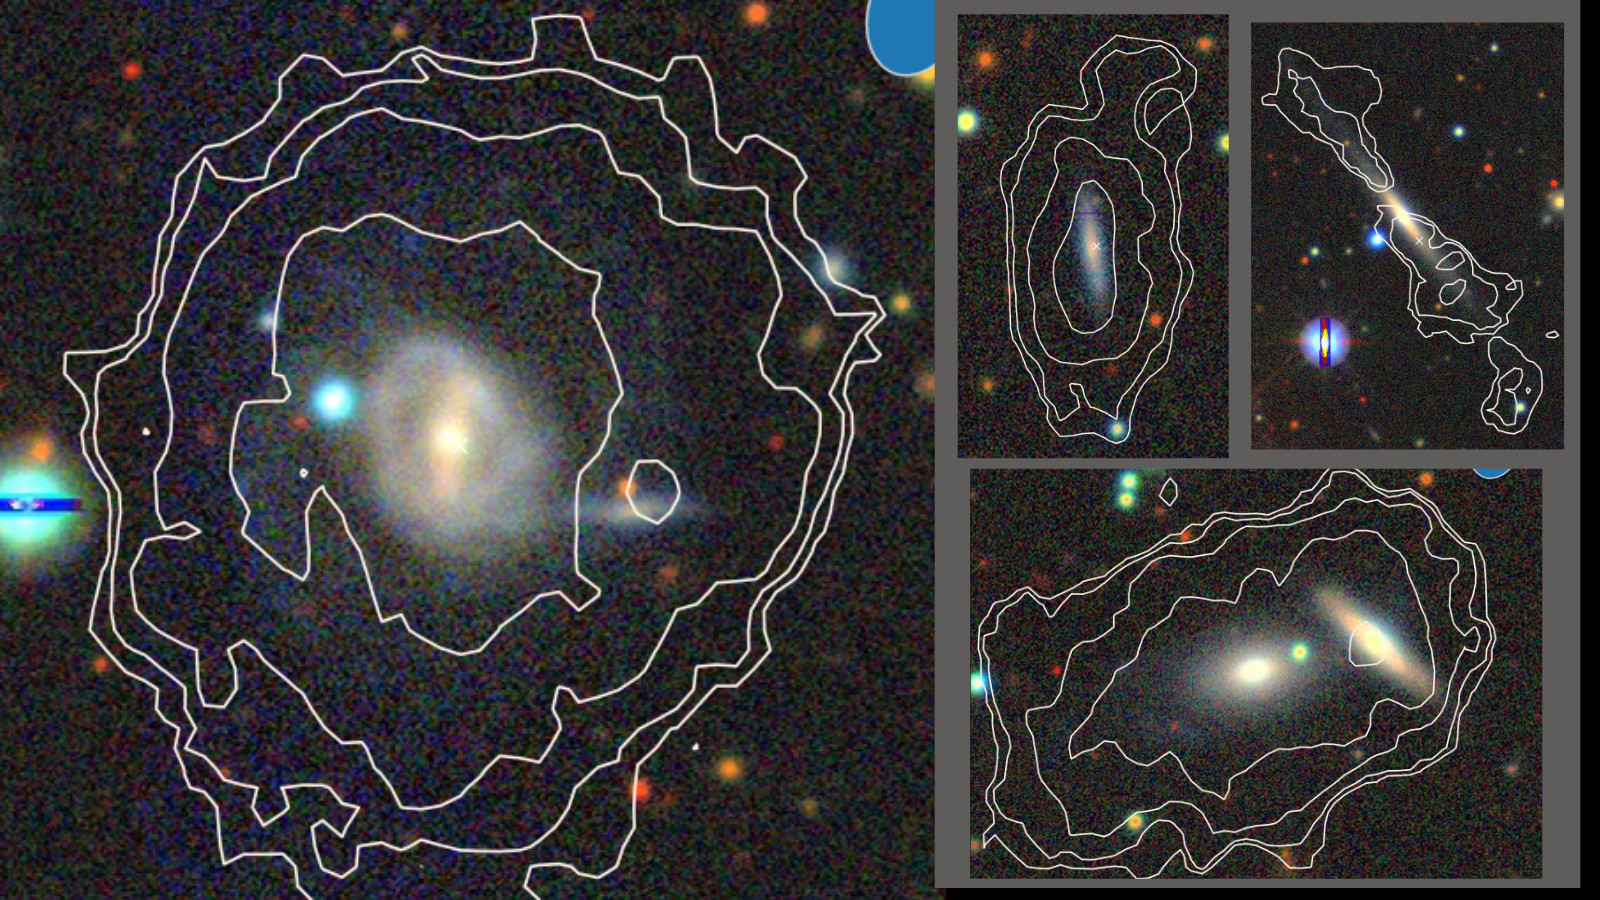 Cosmic gold rush! Astronomers find 49 new galaxies in just 3 hours Space